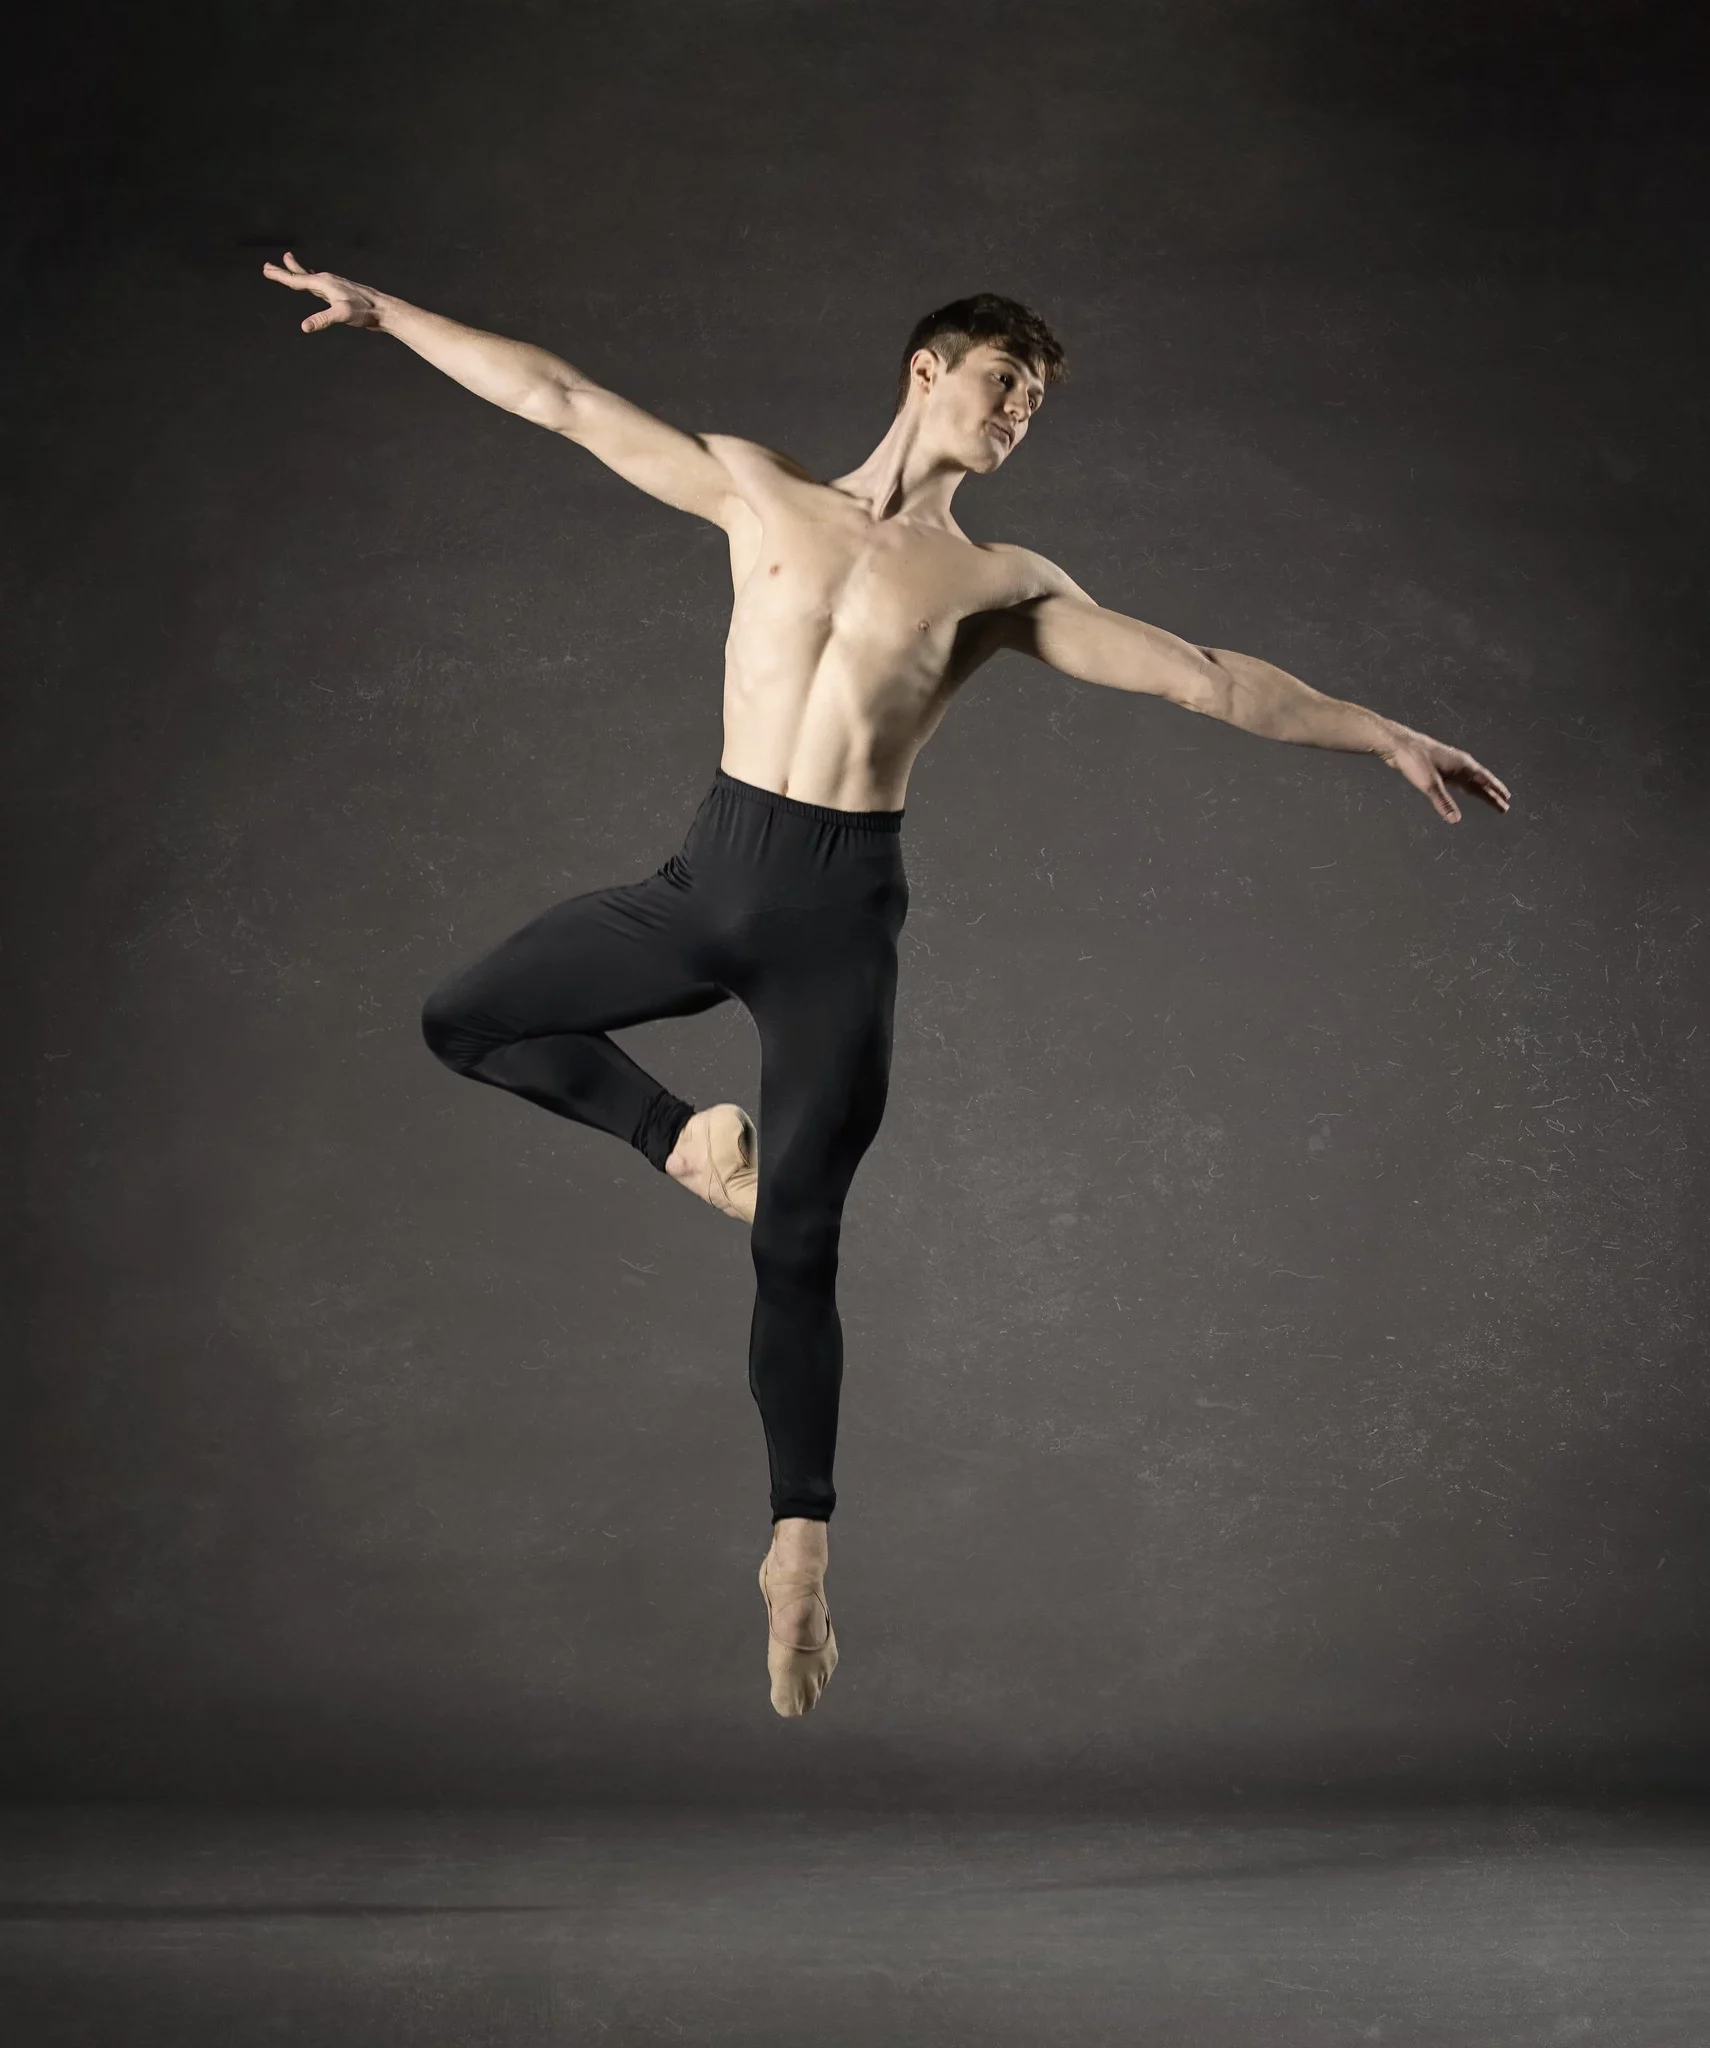 dance degree, male dancer at Anderson University, student in costume and dance pose